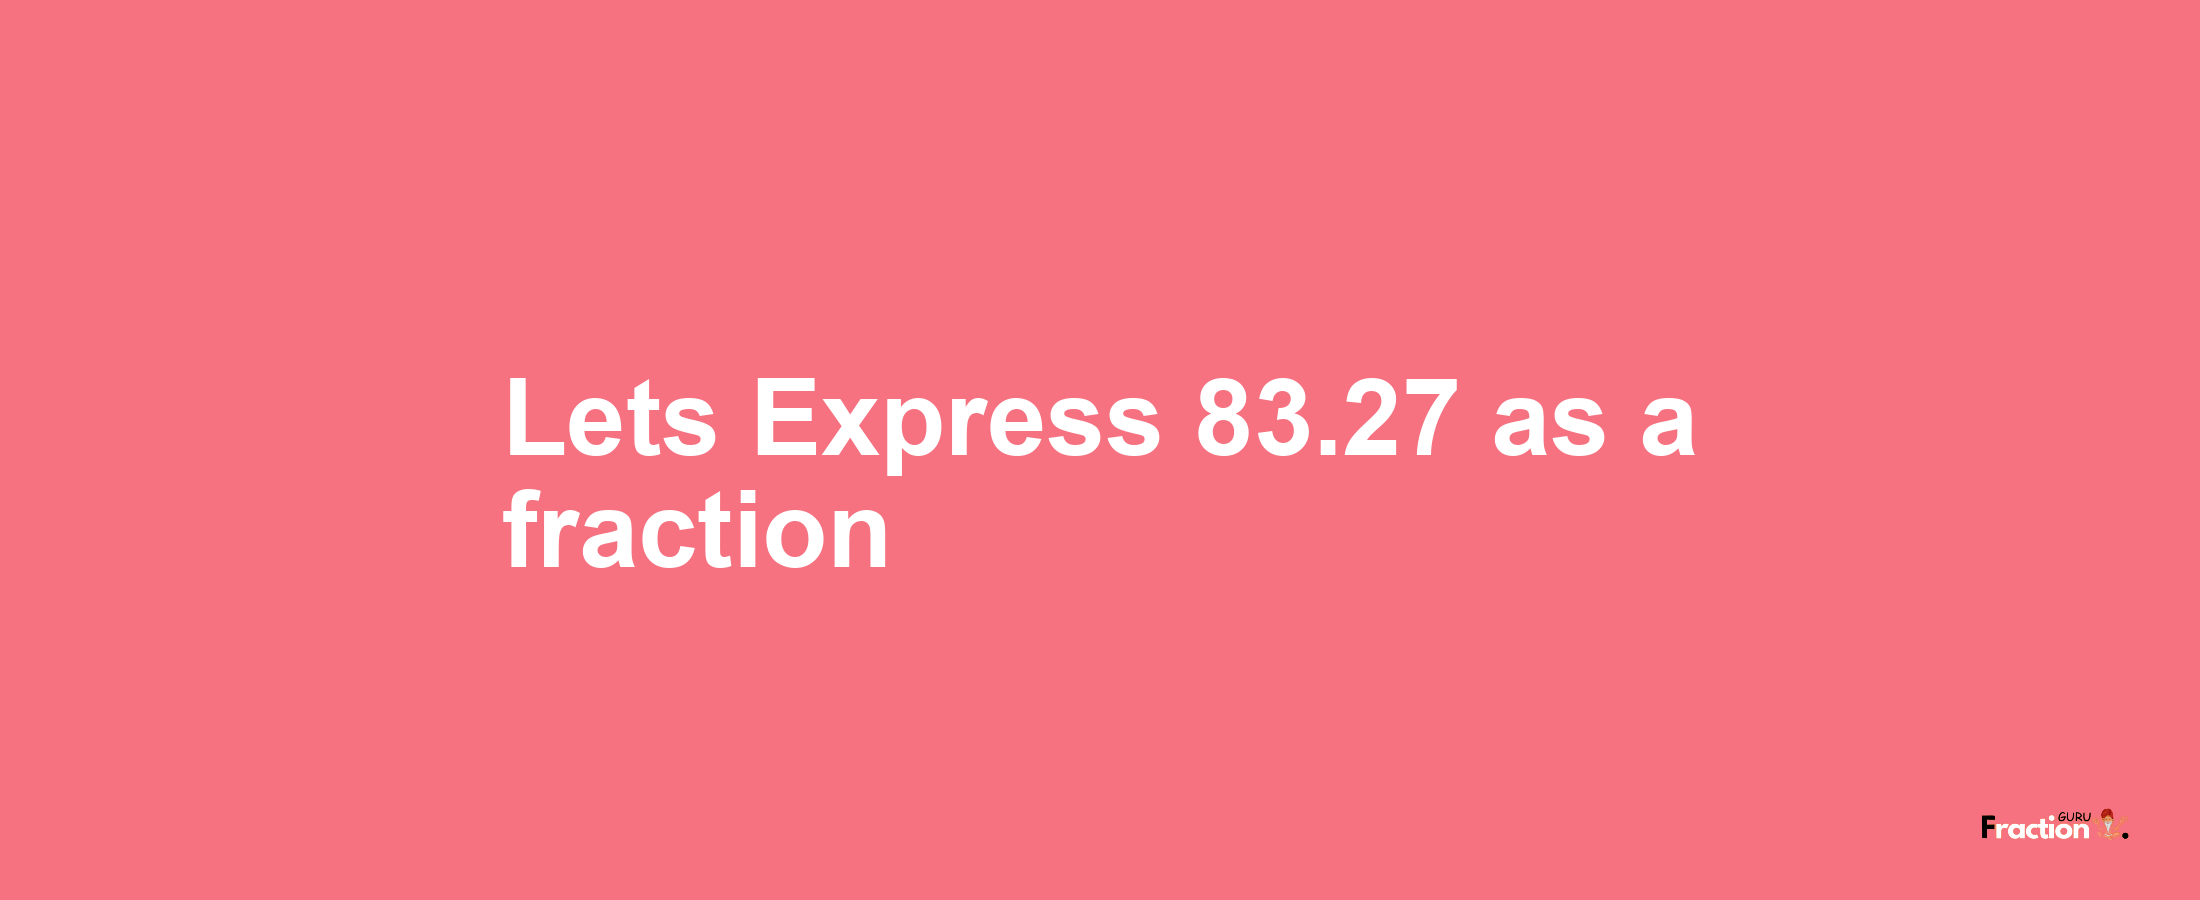 Lets Express 83.27 as afraction